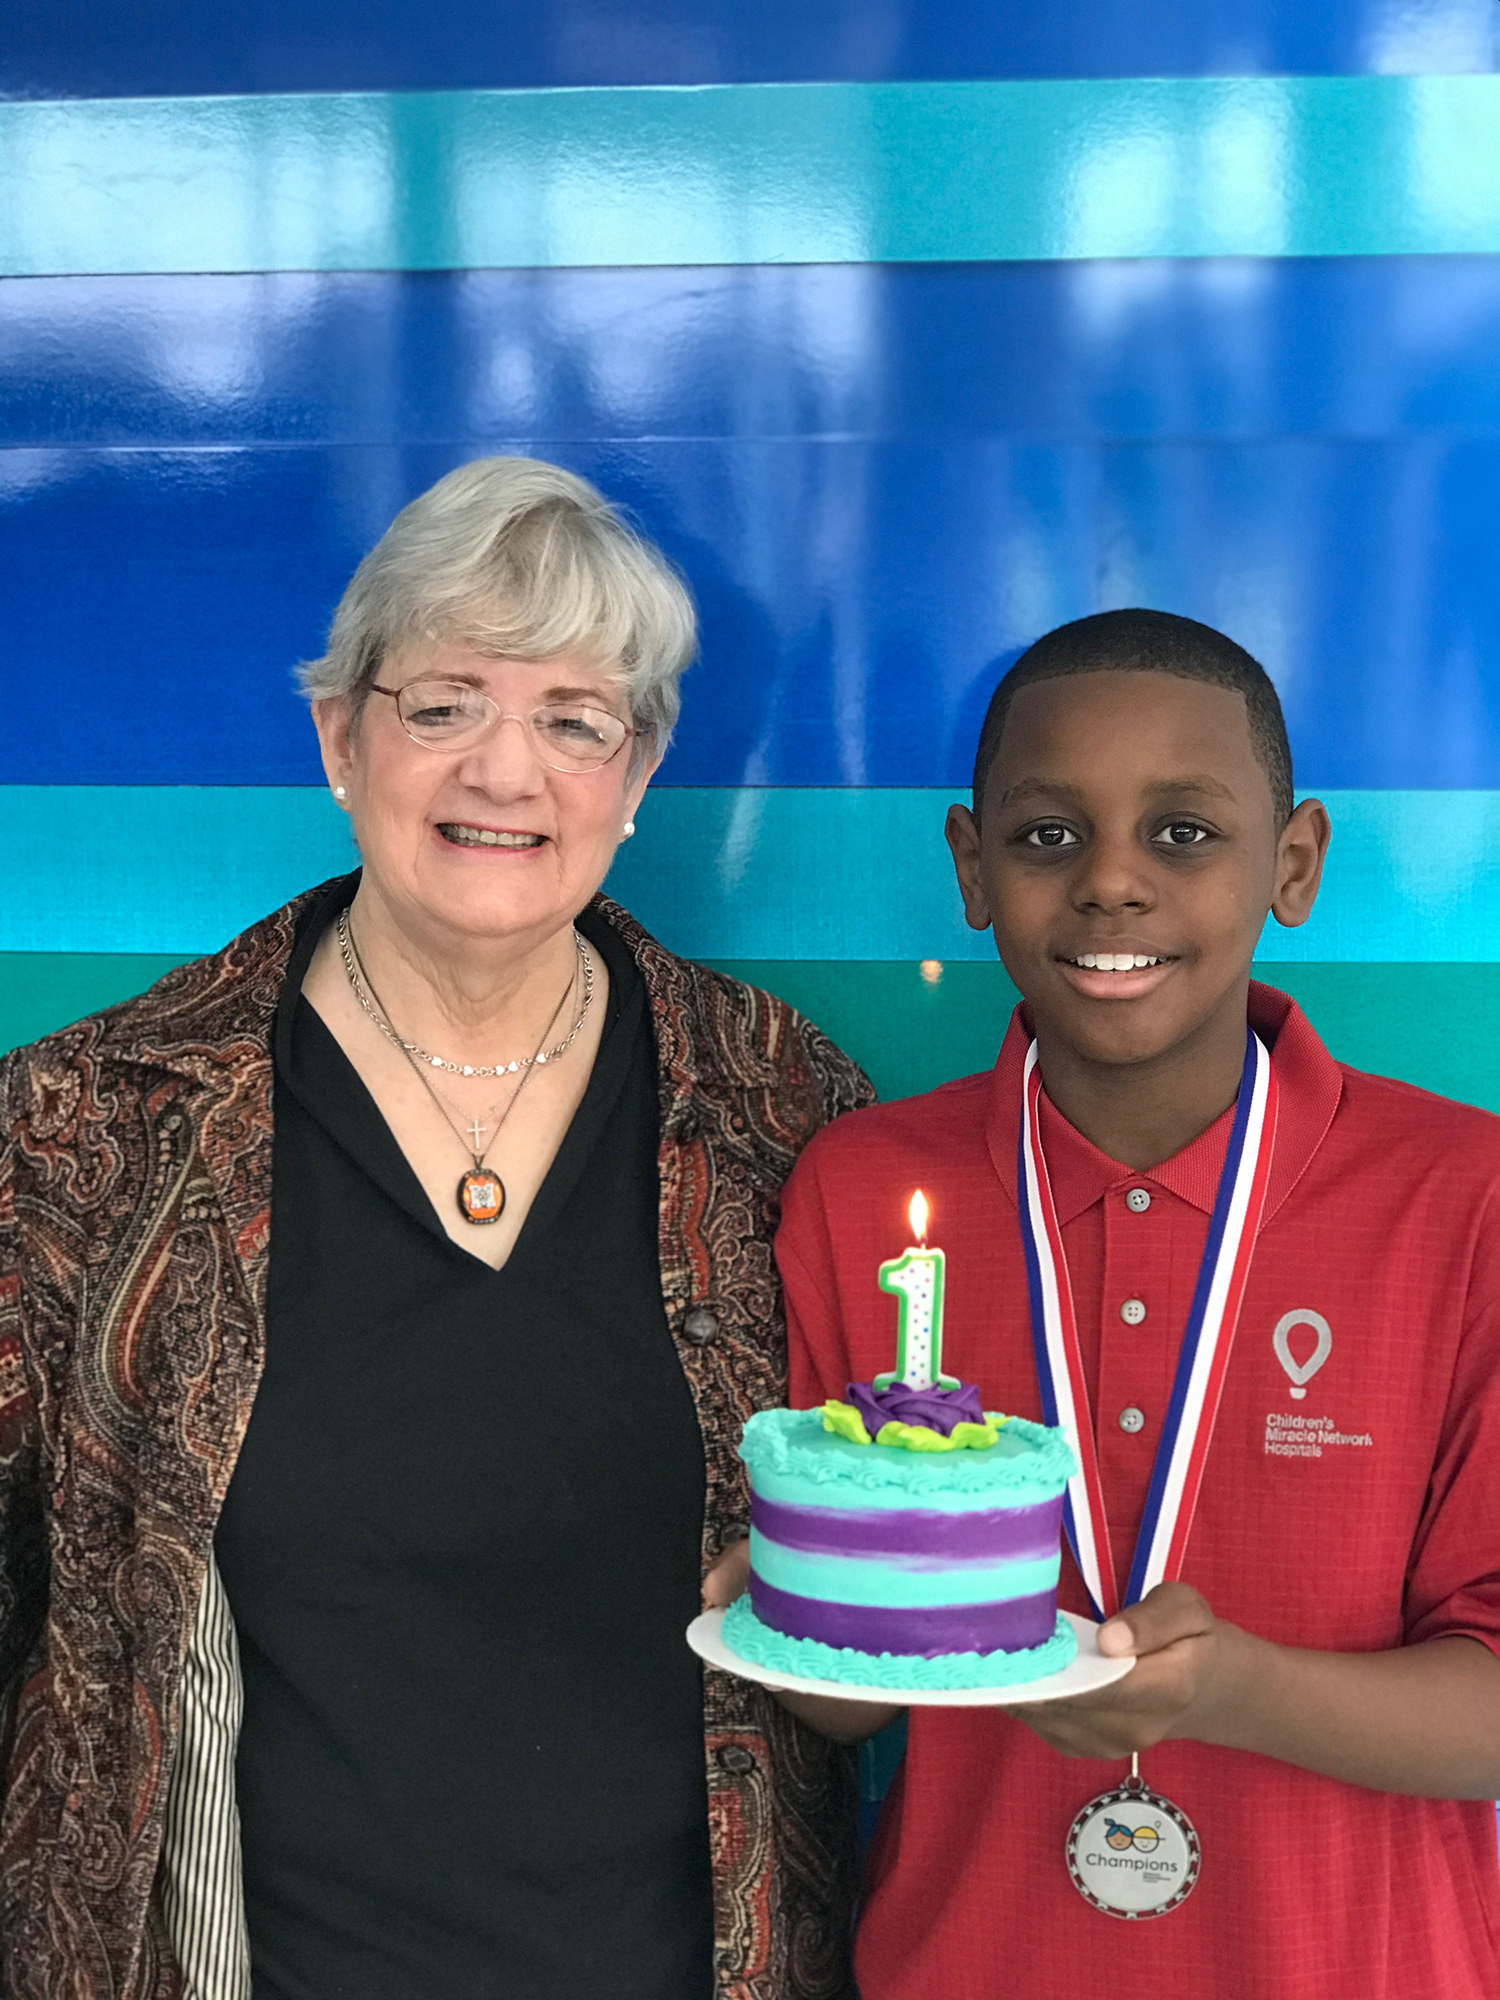 Beverly Bryan Thompson stands beside a boy holding a birthday cake